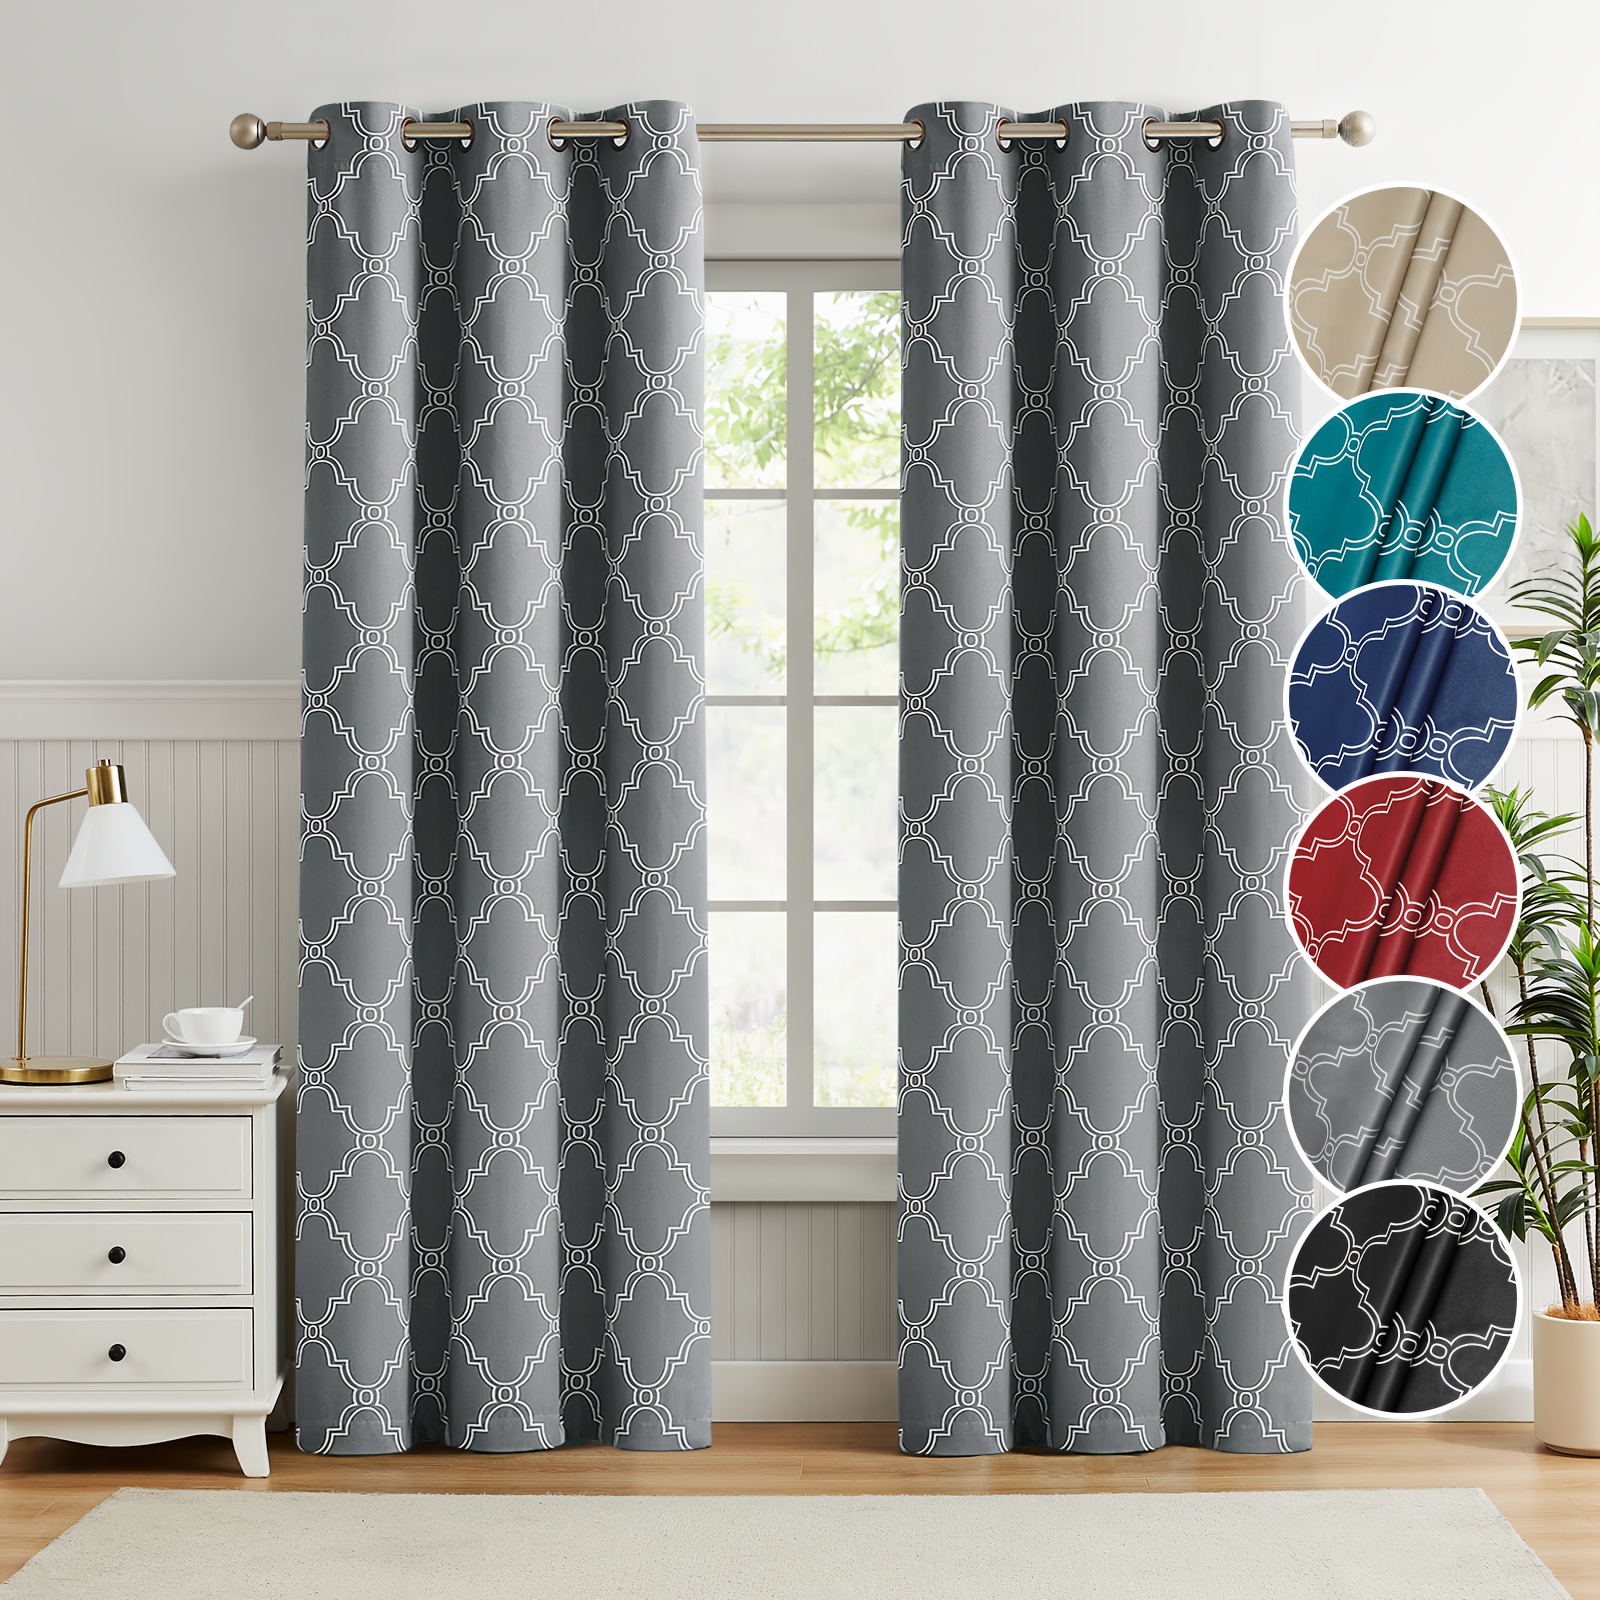 

2pcs 100% Blackout Moroccan Curtains Ring Top Thermal Insulated Curtains With Black Lining, Full Room Darkening Noise Reducing Grommet Curtain For Bedroom, Dining Rooms